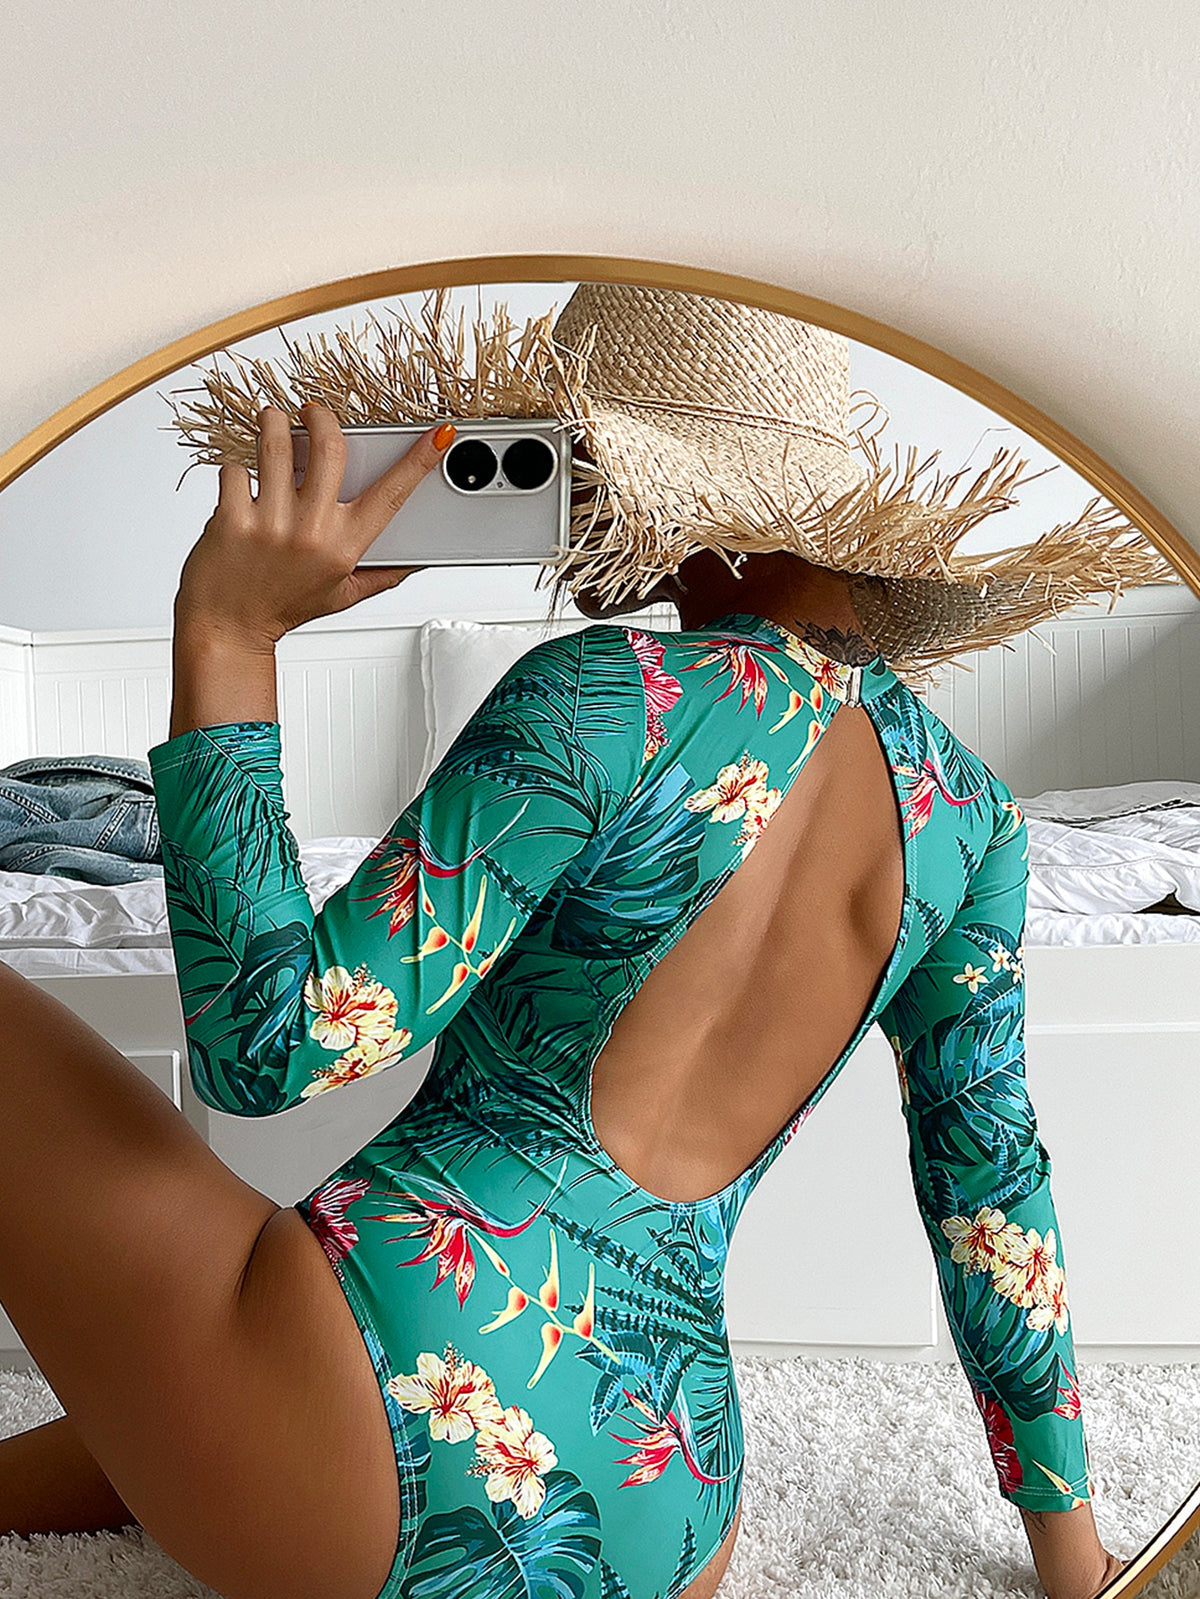 Tropical Print High Neck One Piece Swimsuit - 